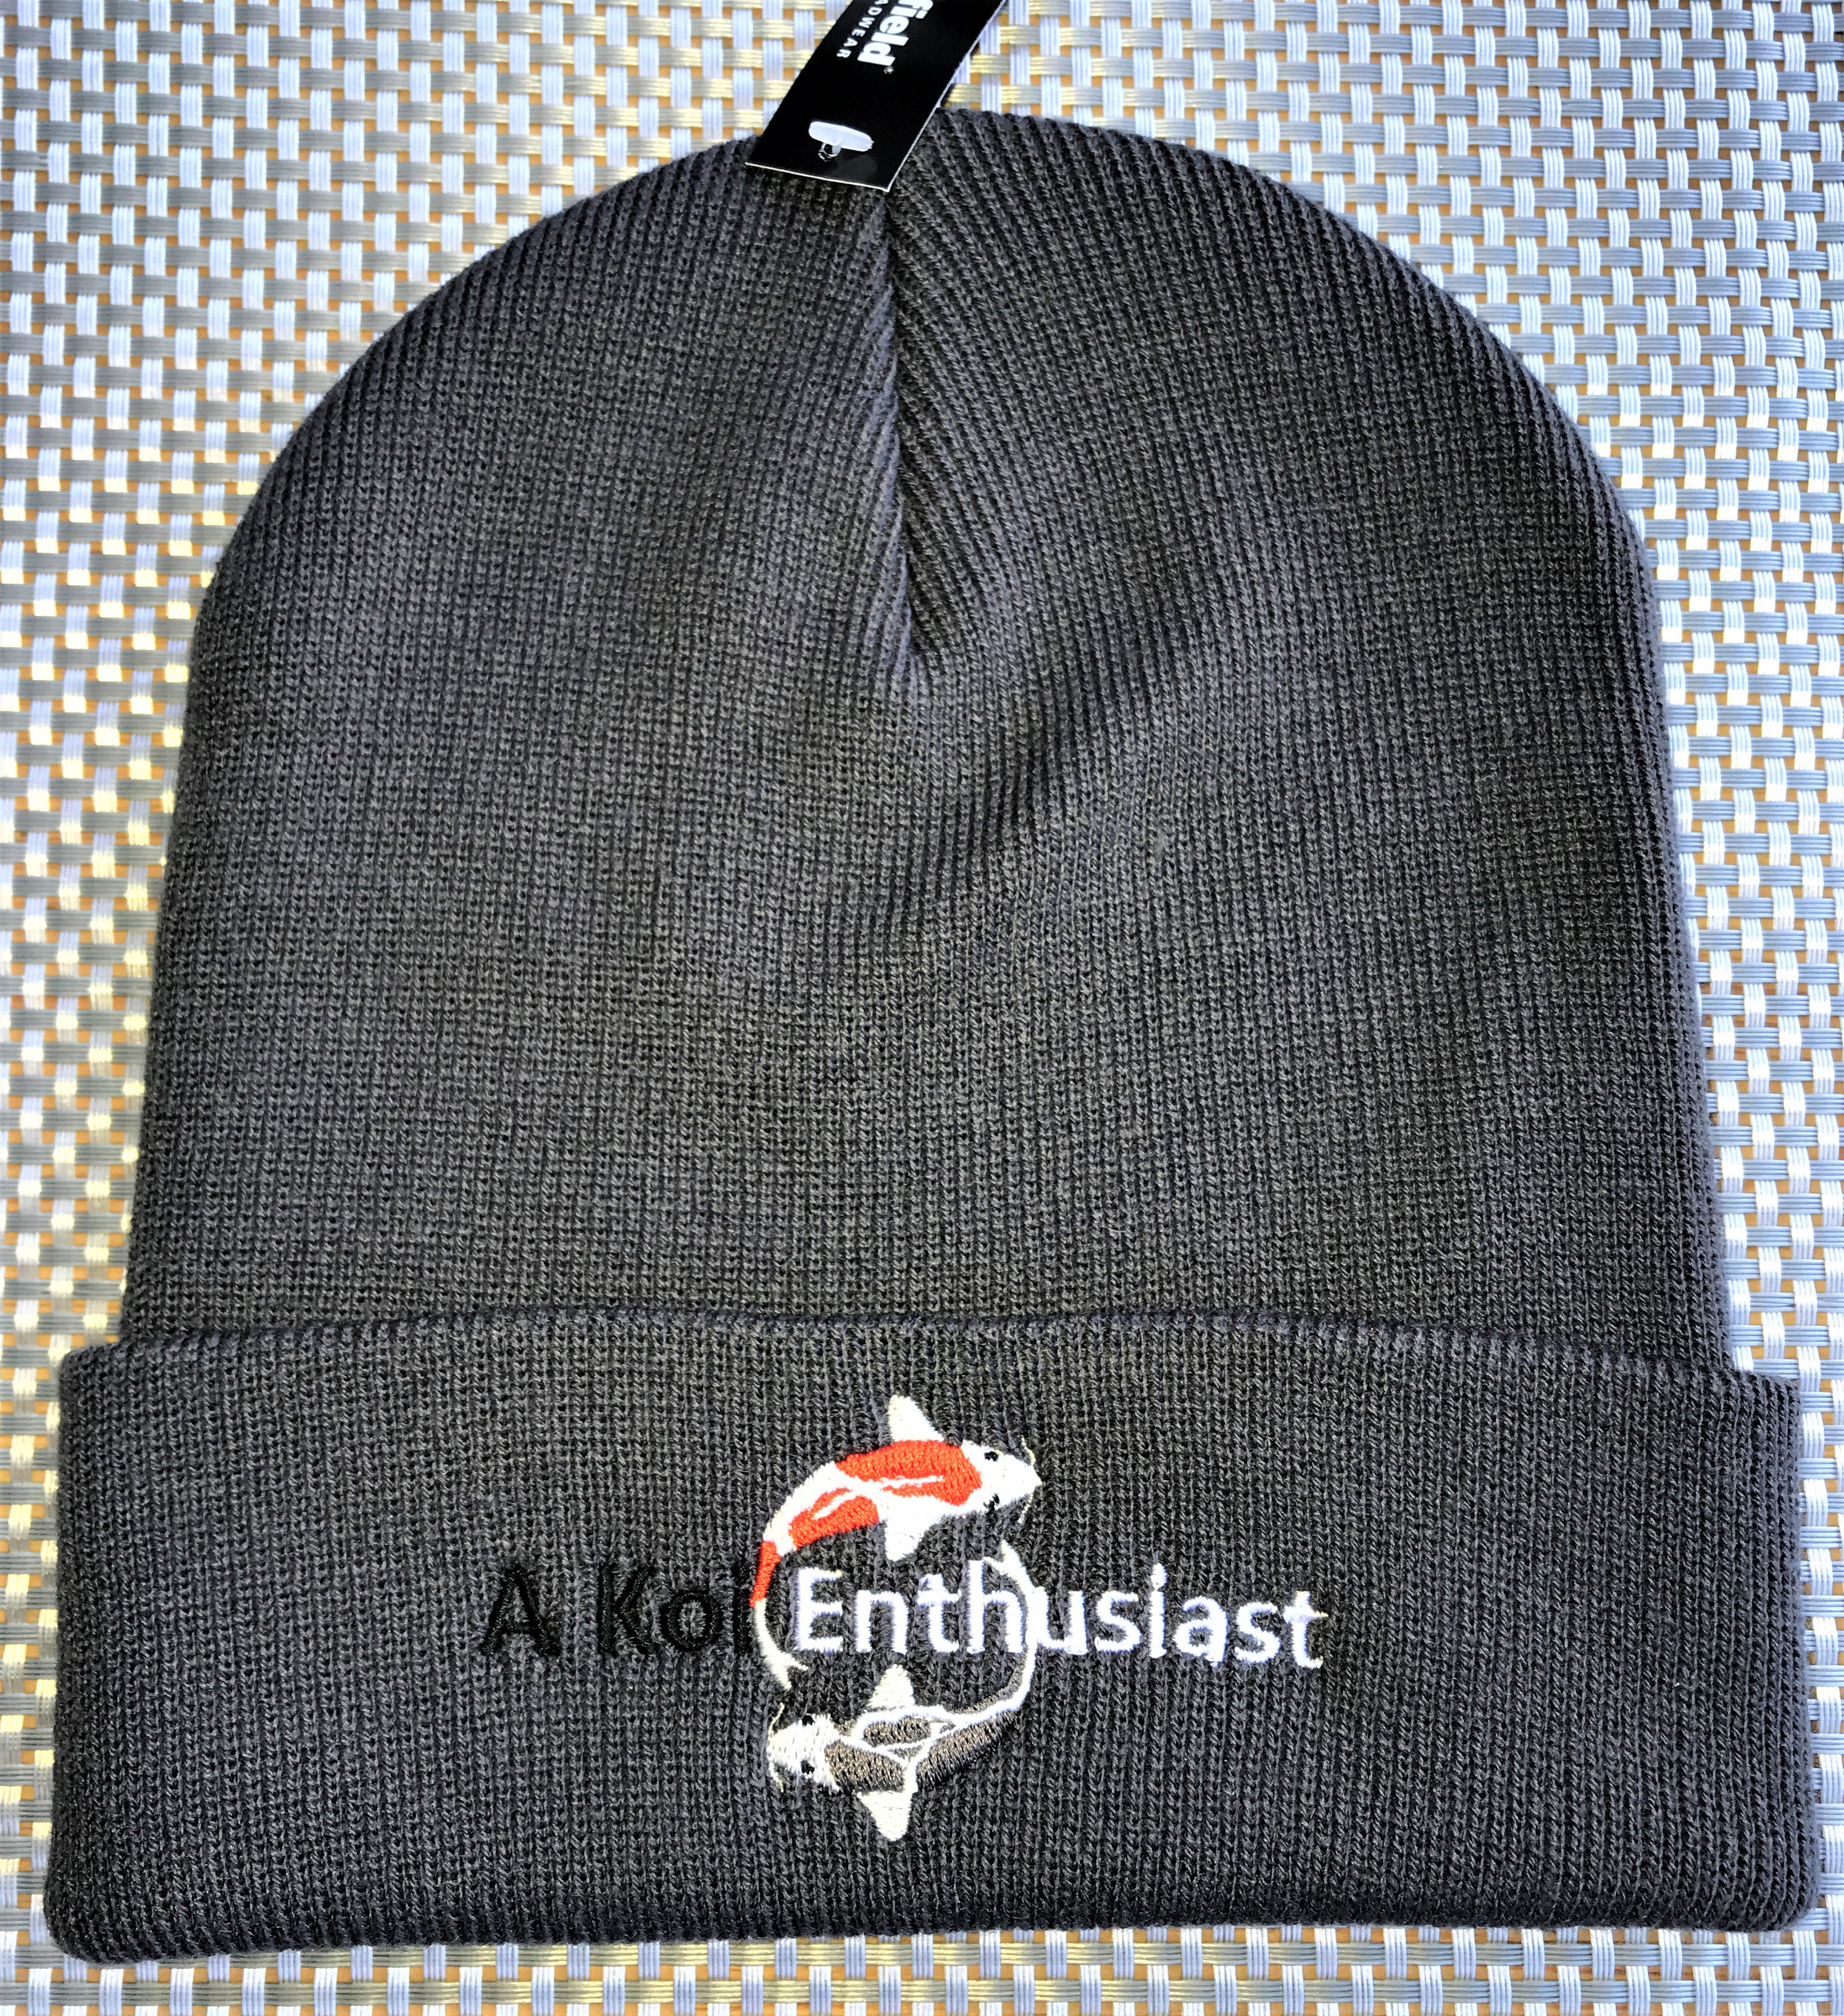 Graphite Grey Classic "A Koi Enthusiast" Embroidered Beanie